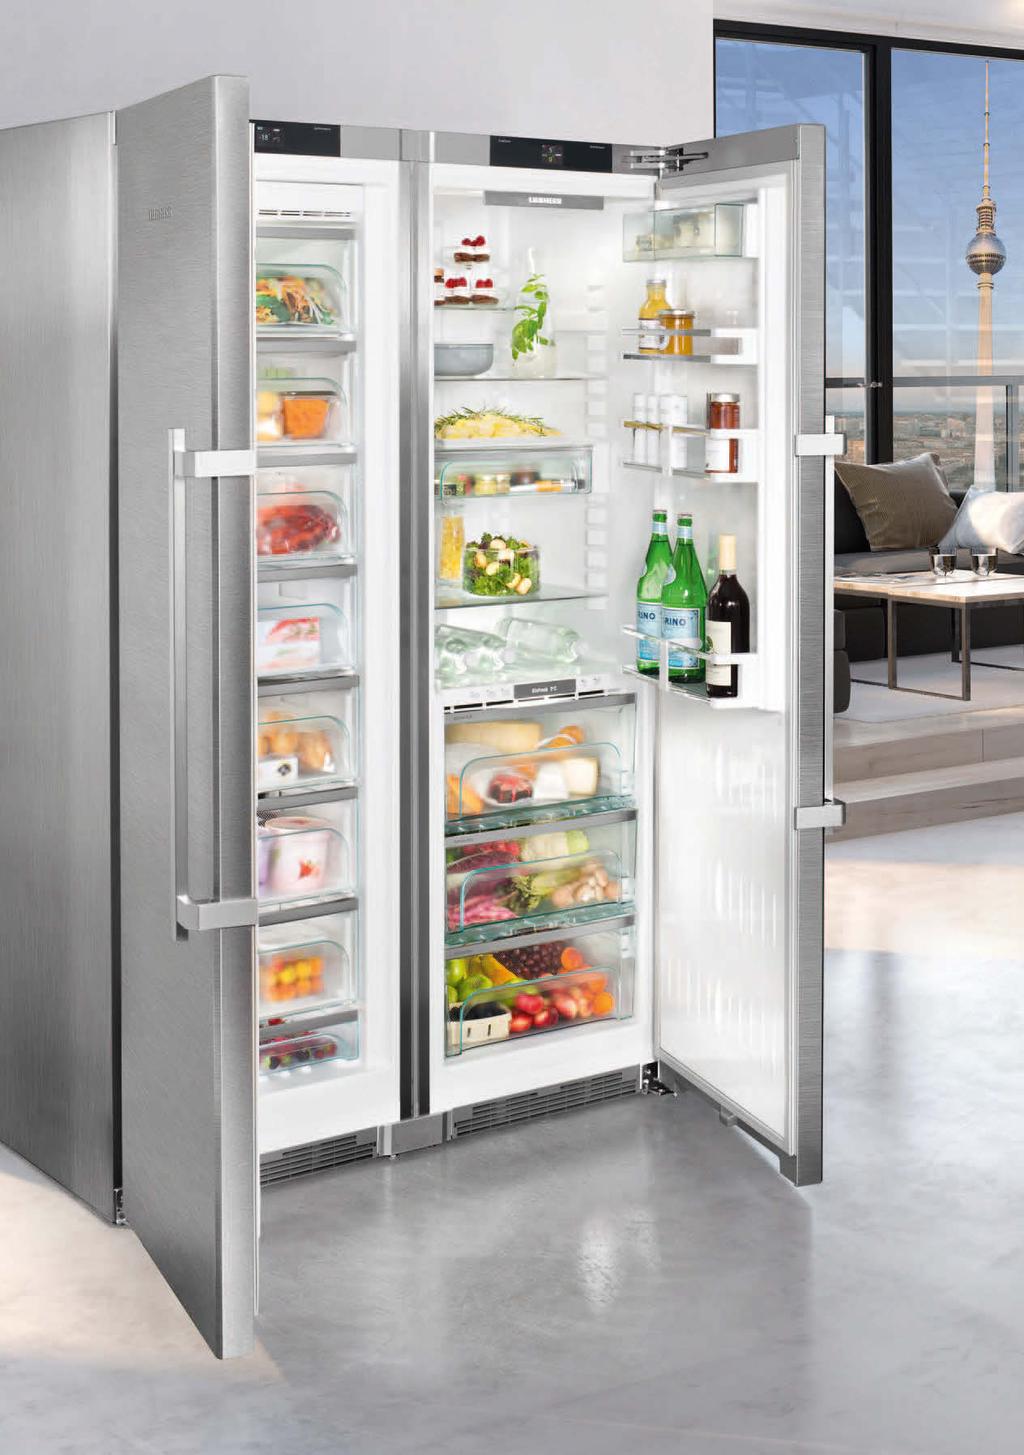 The new BluPerformance Side-by-Side fridge-freezer: SBSes 8663 With their elegant and timeless design, Liebherr Side-by-Side fridge-freezers meet the highest aesthetic demands.